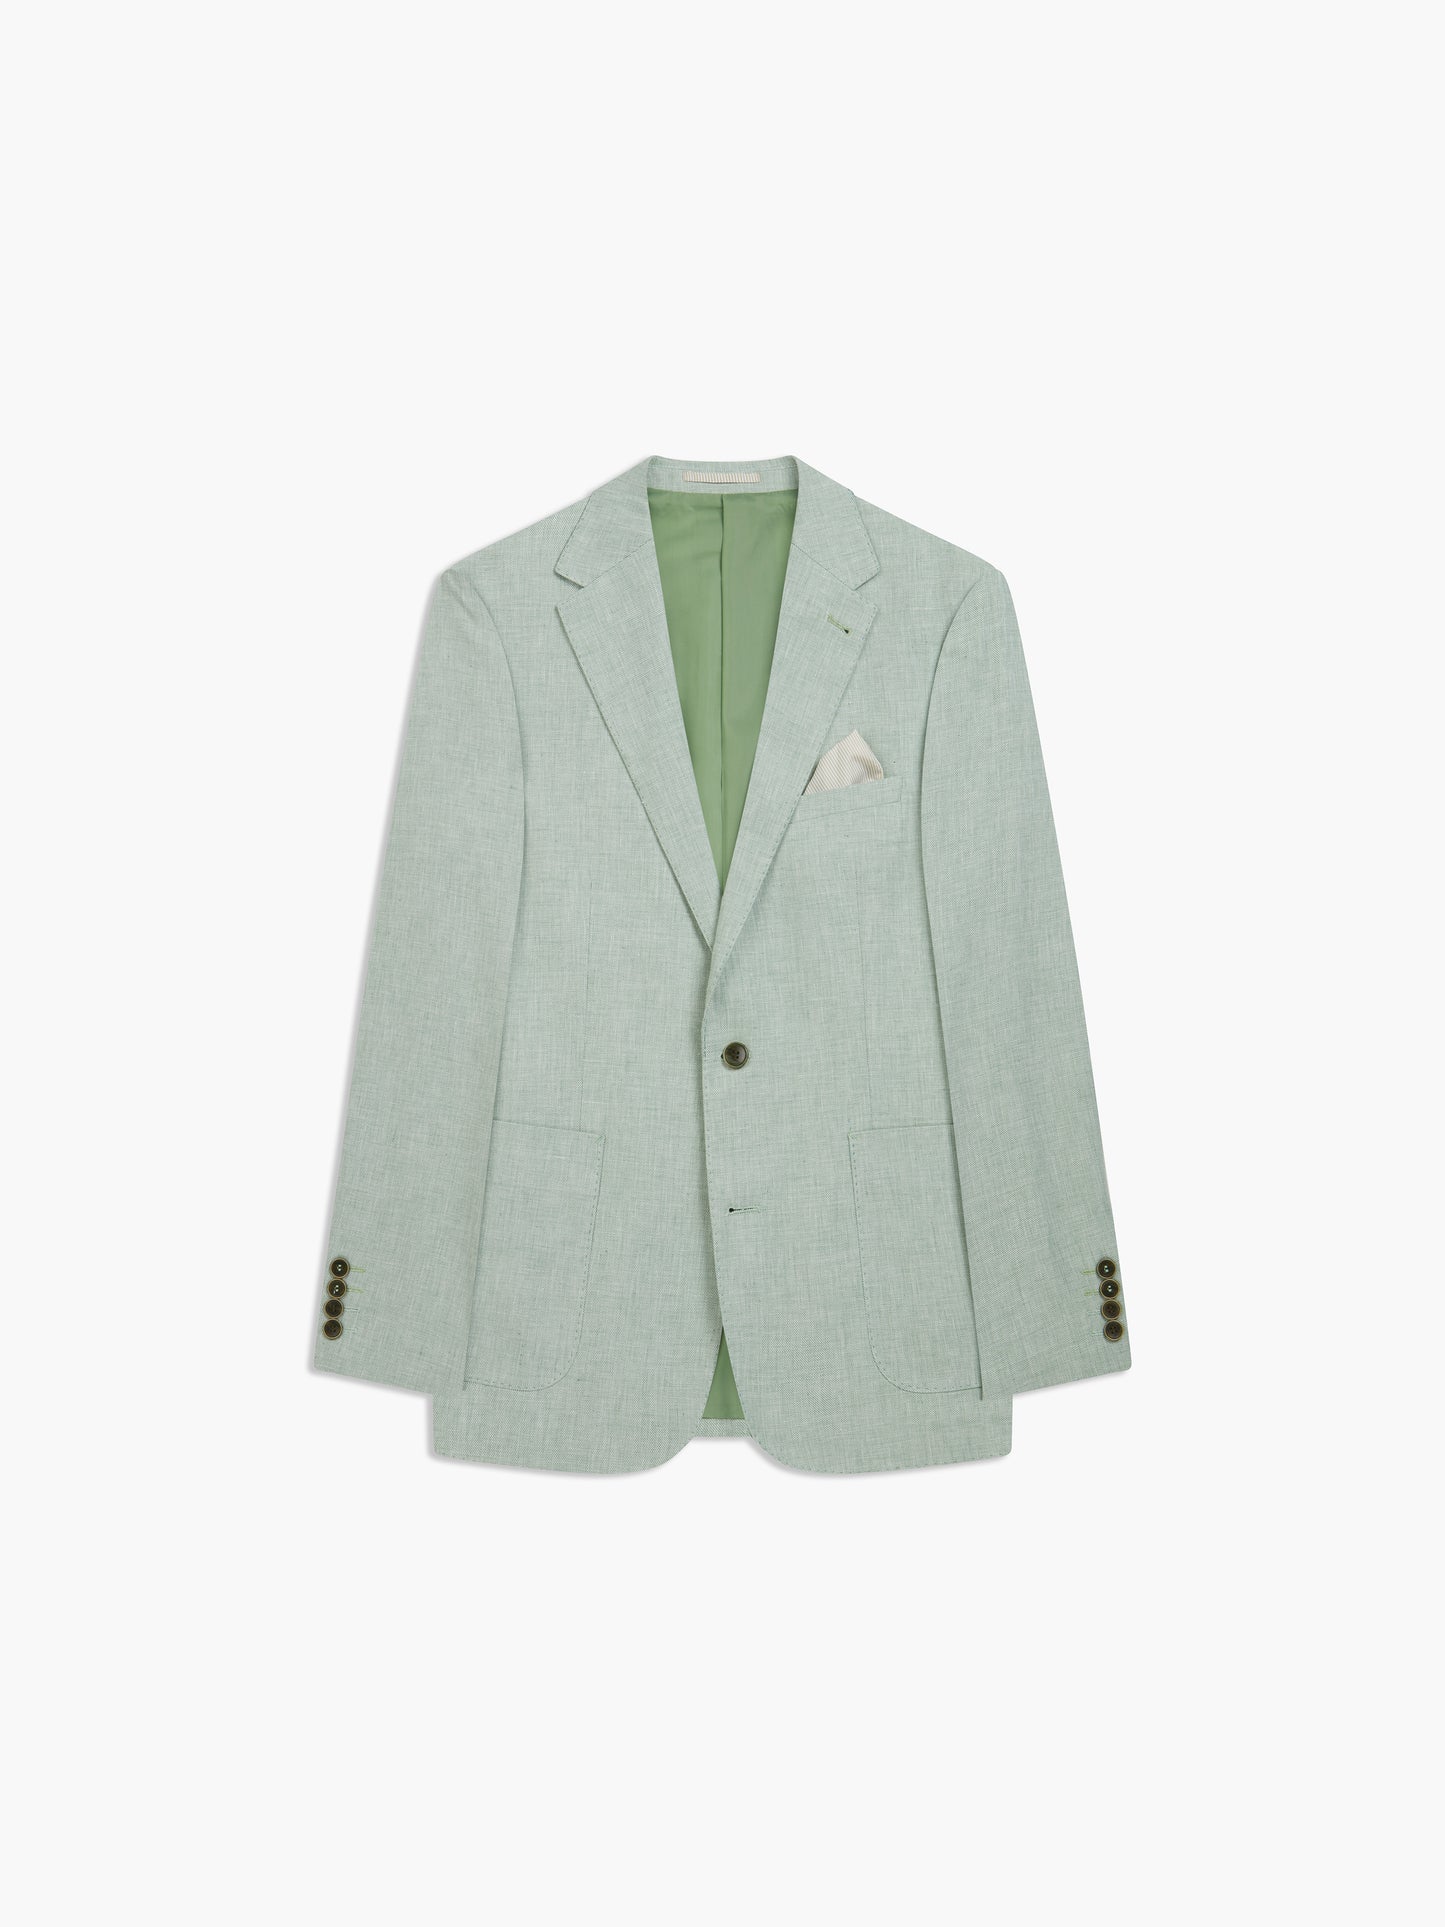 Image 6 of Slim Fit Single Breasted Linen Suit Jacket in Light Green